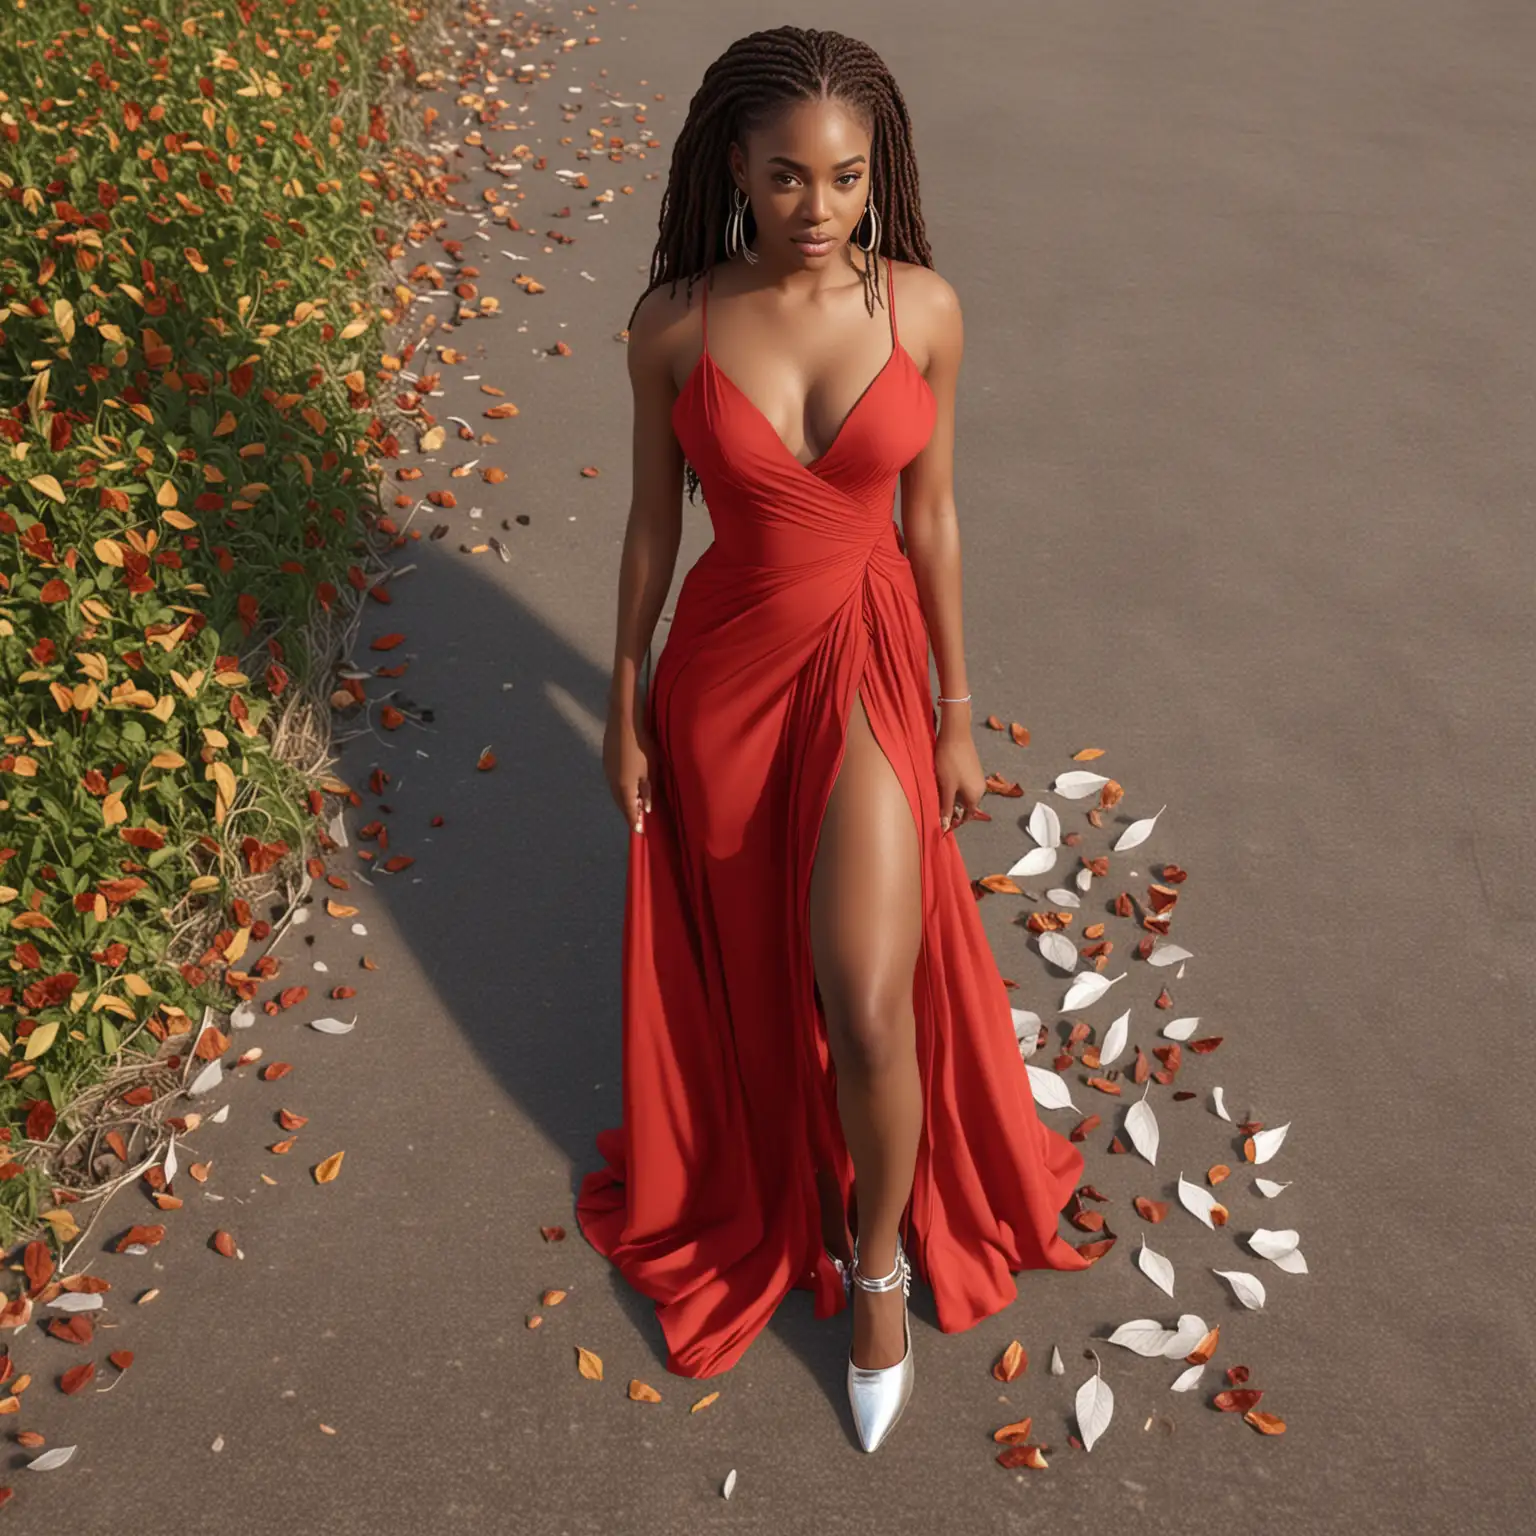 4k hyper realistic African American voluptous woman in long red dress with a split. She is wearing silver shoes and accessories. Her hair is in sister locs and is long and brown. There is a leaf on the ground next to her.